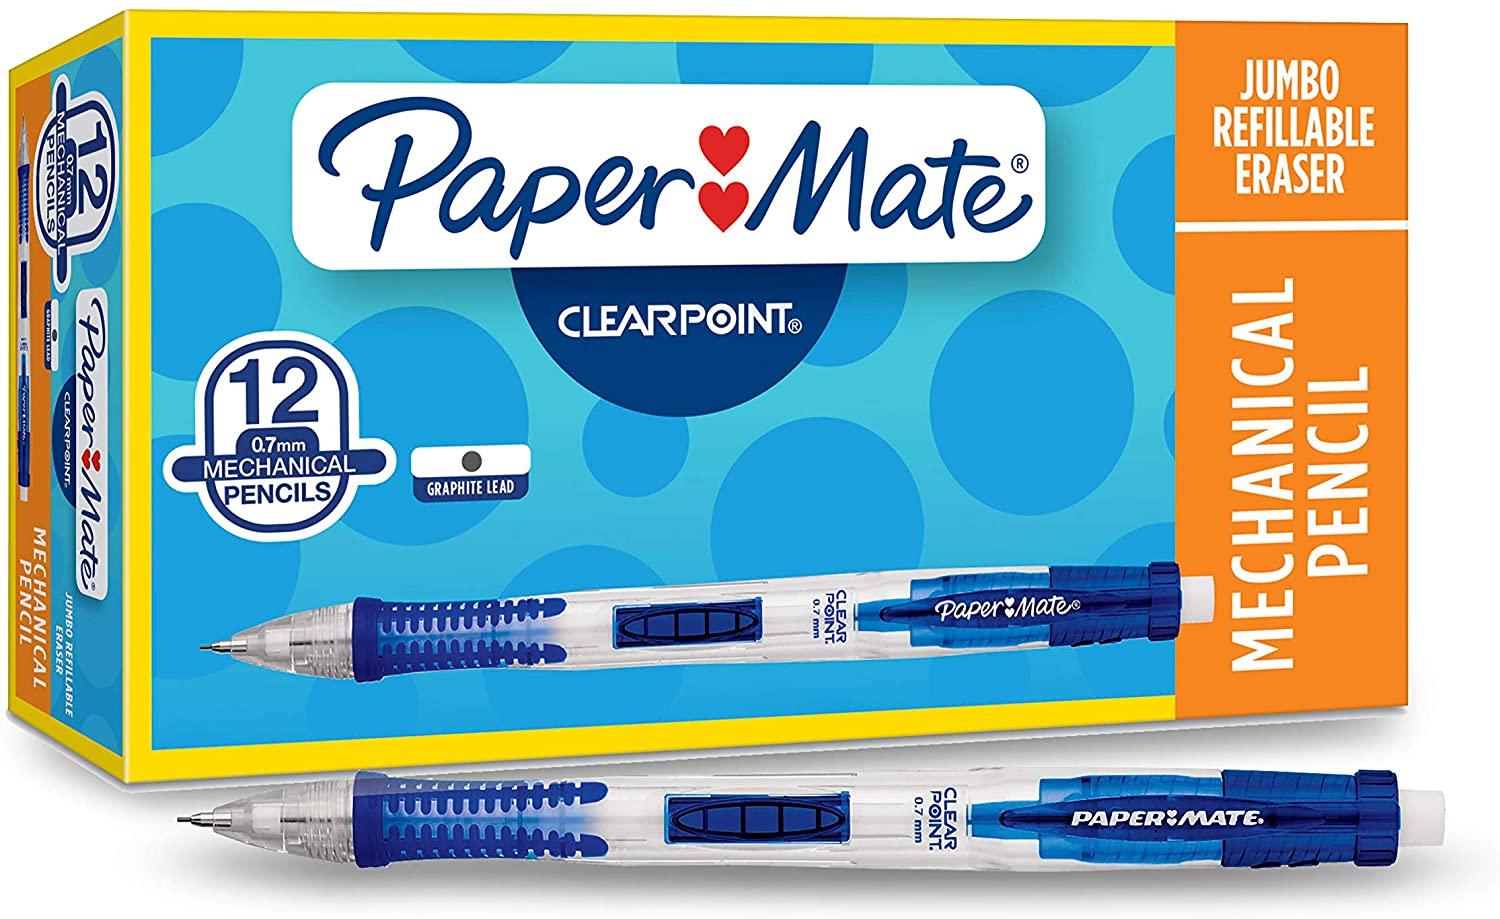 12 Paper Mate Clearpoint Mechanical Pencils for $15.13